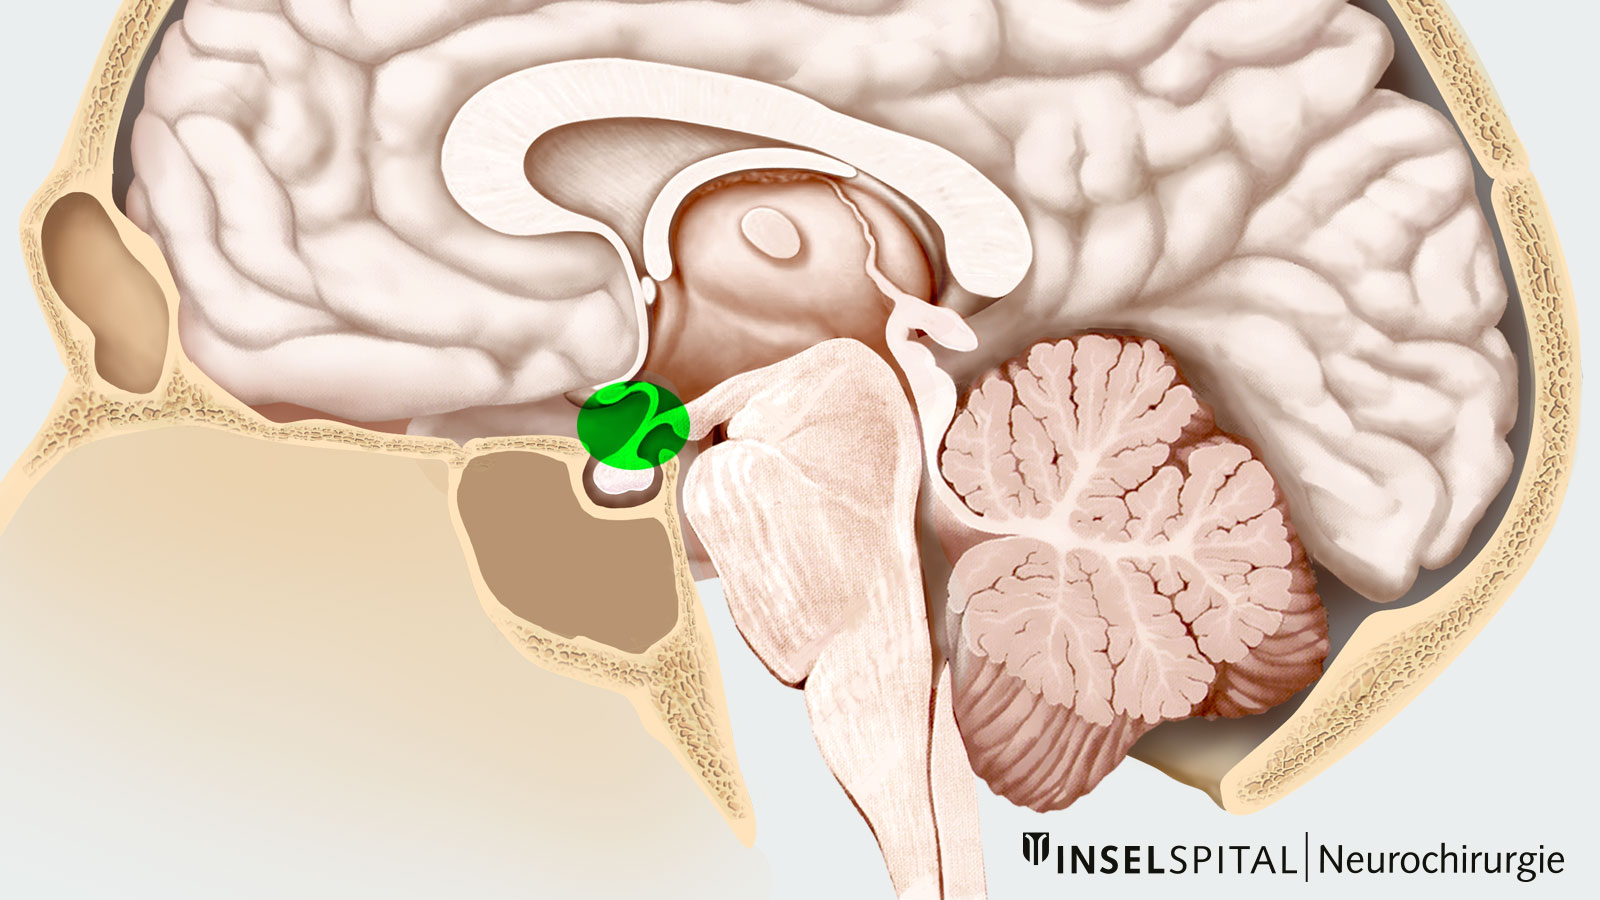 Skull drawing. The area where craniopharyngeomas normally grow is marked in green.